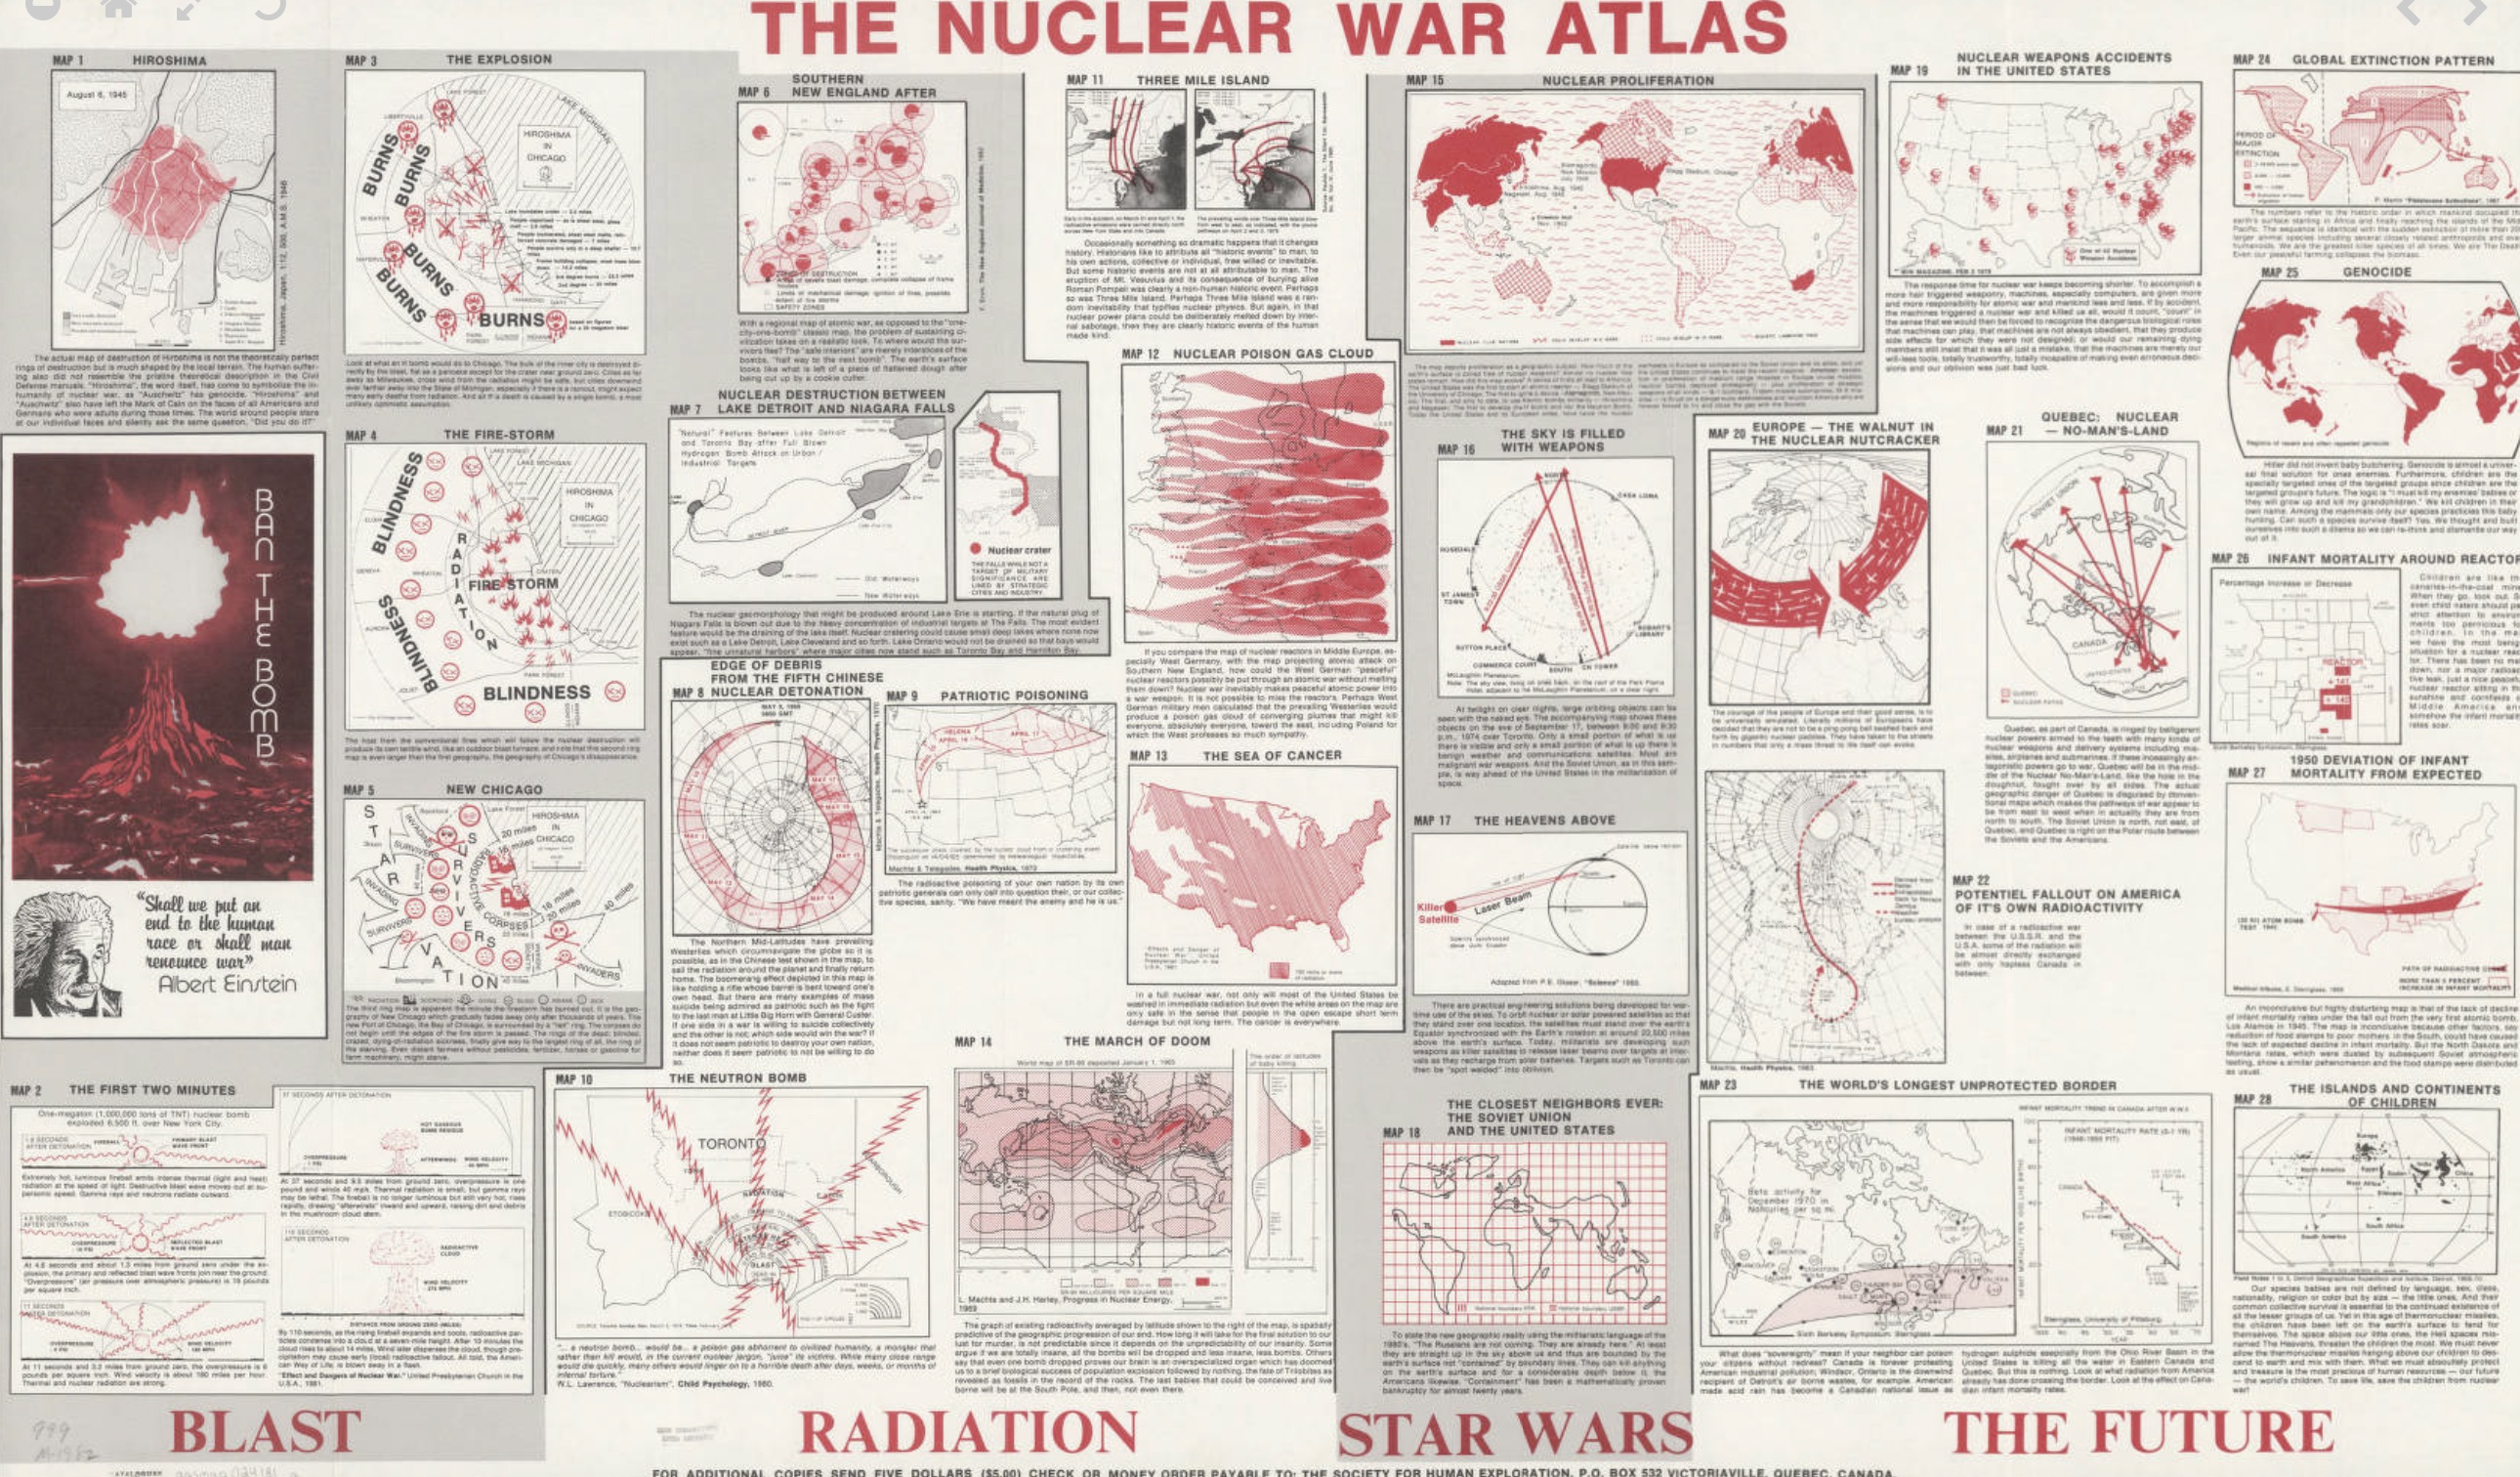 Multiple descriptions of post-nuclear scenarios such as air contamination, pollution, ect